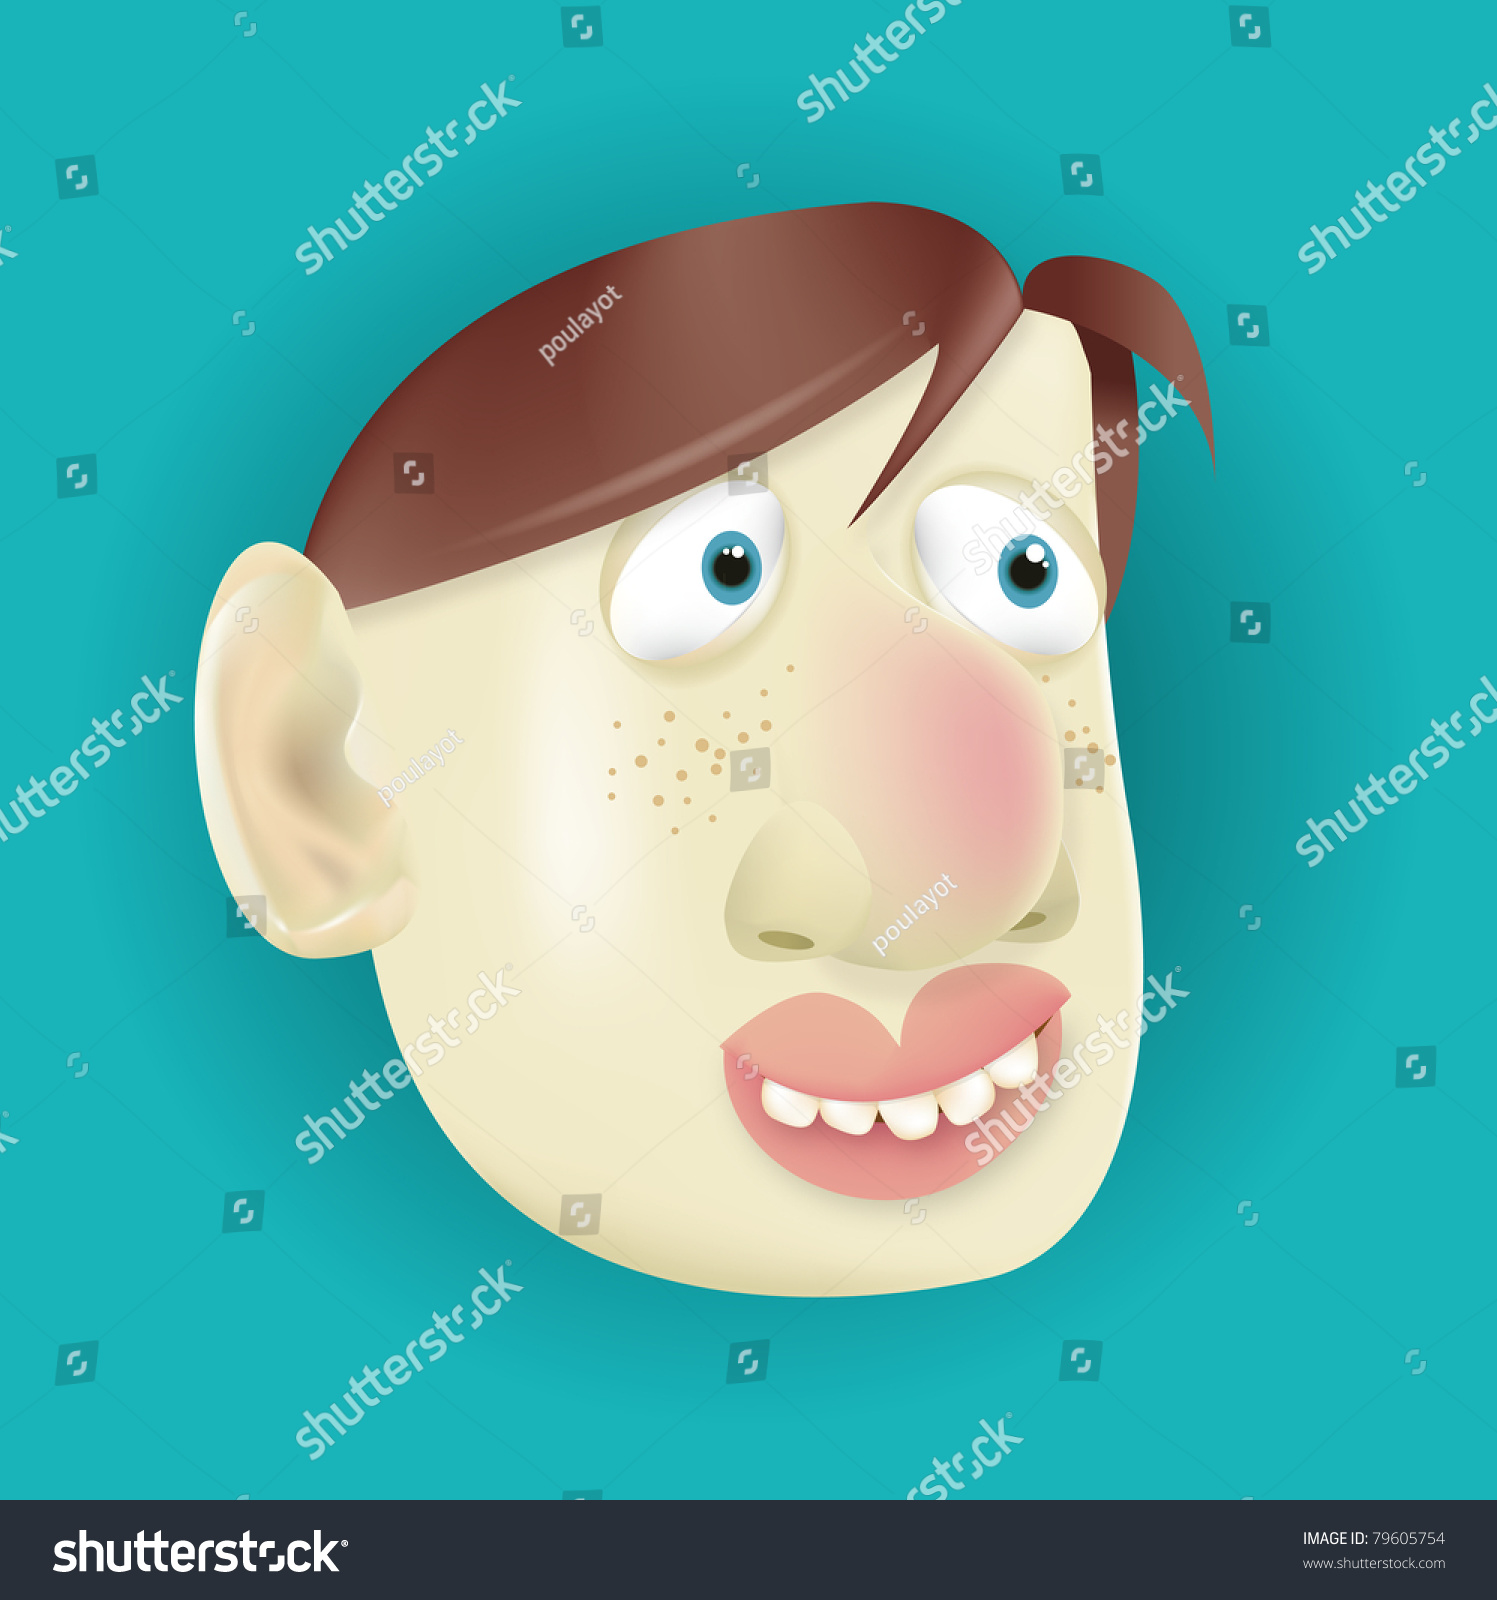 Vector Cartoon Character With Funny Caricature Big Nose - 79605754